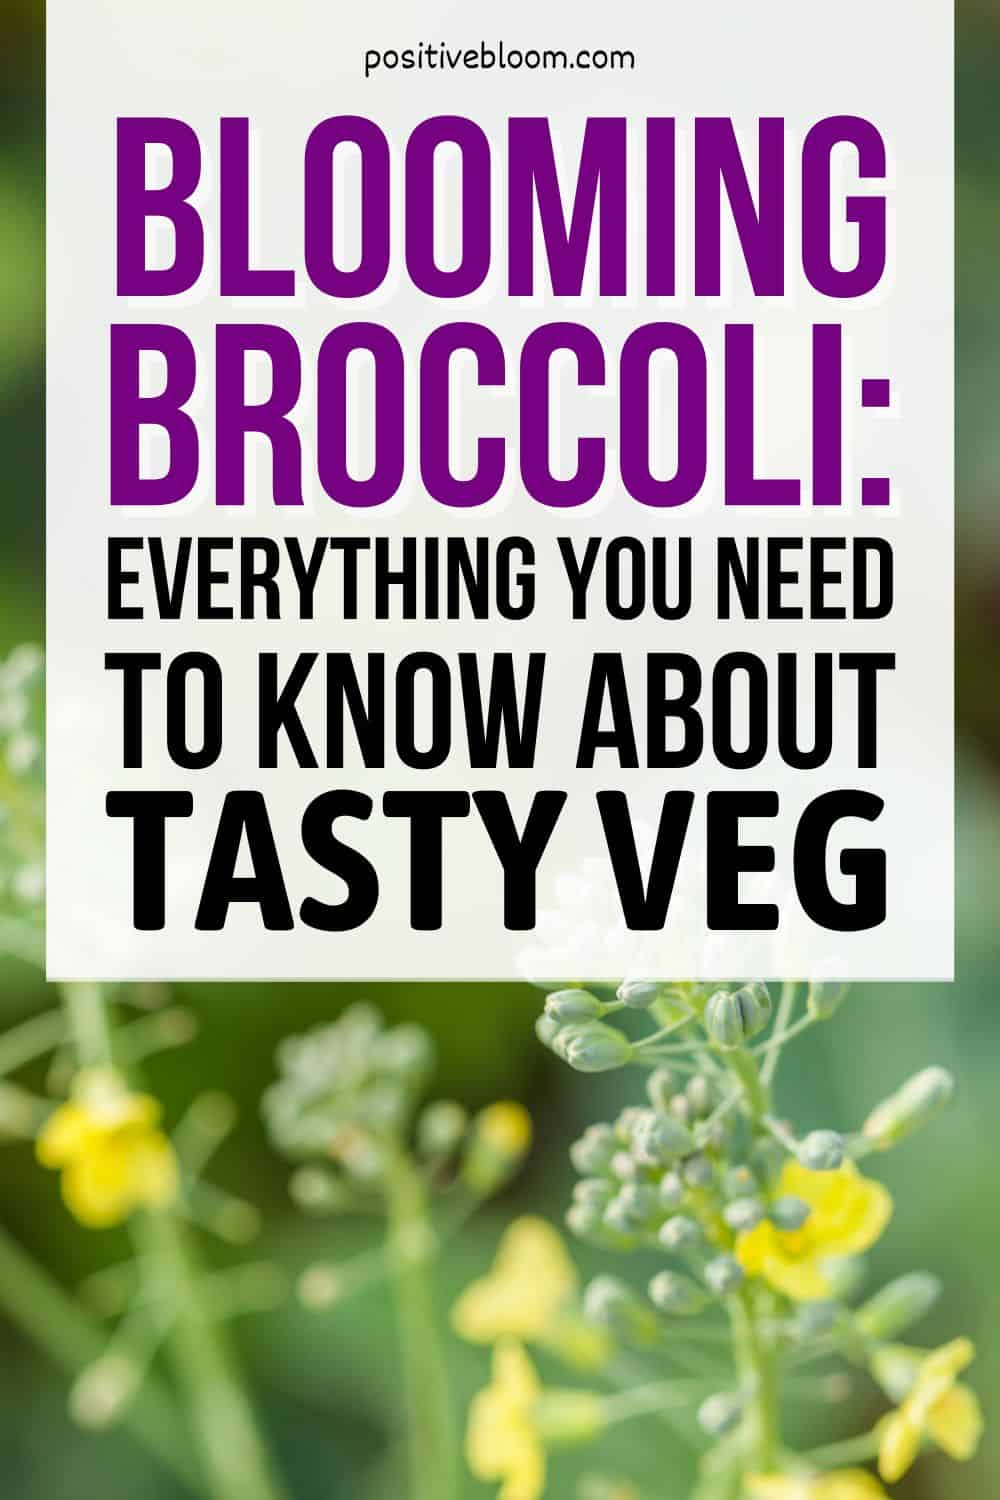 Blooming Broccoli All You Need To Know About This Tasty Veg Pinterest